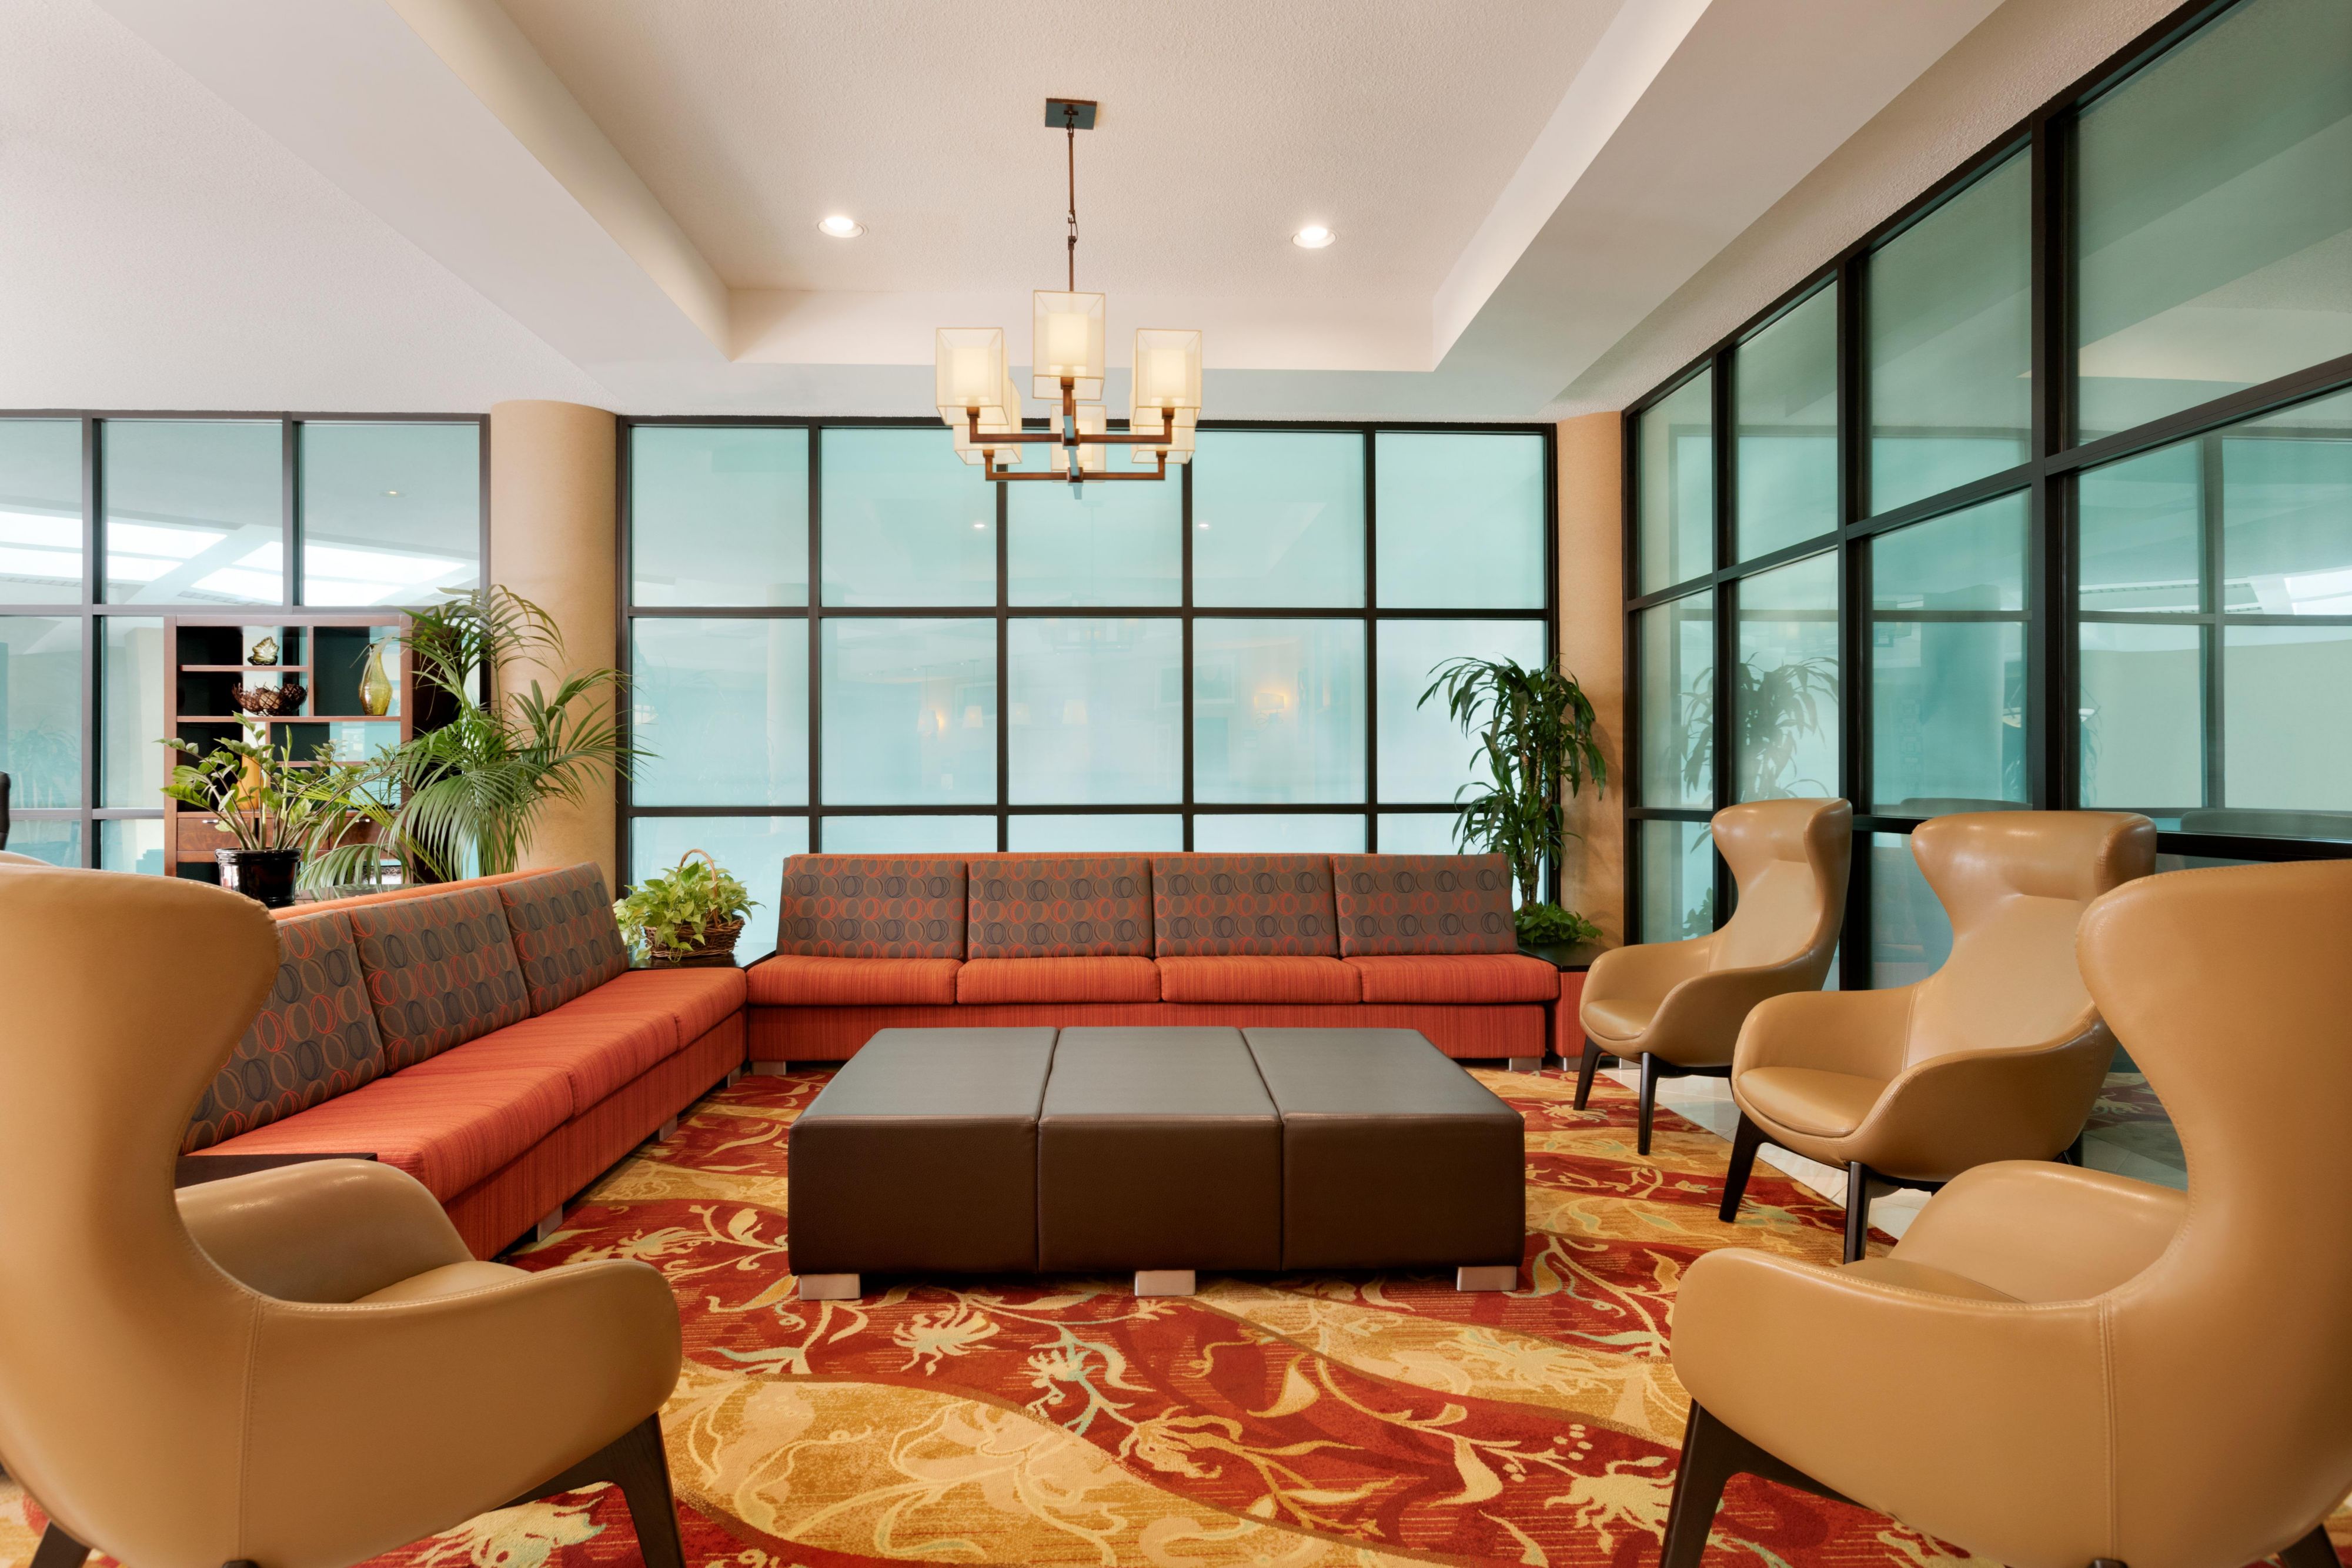 Our lobby features welcoming décor and comfortable lounge seating.